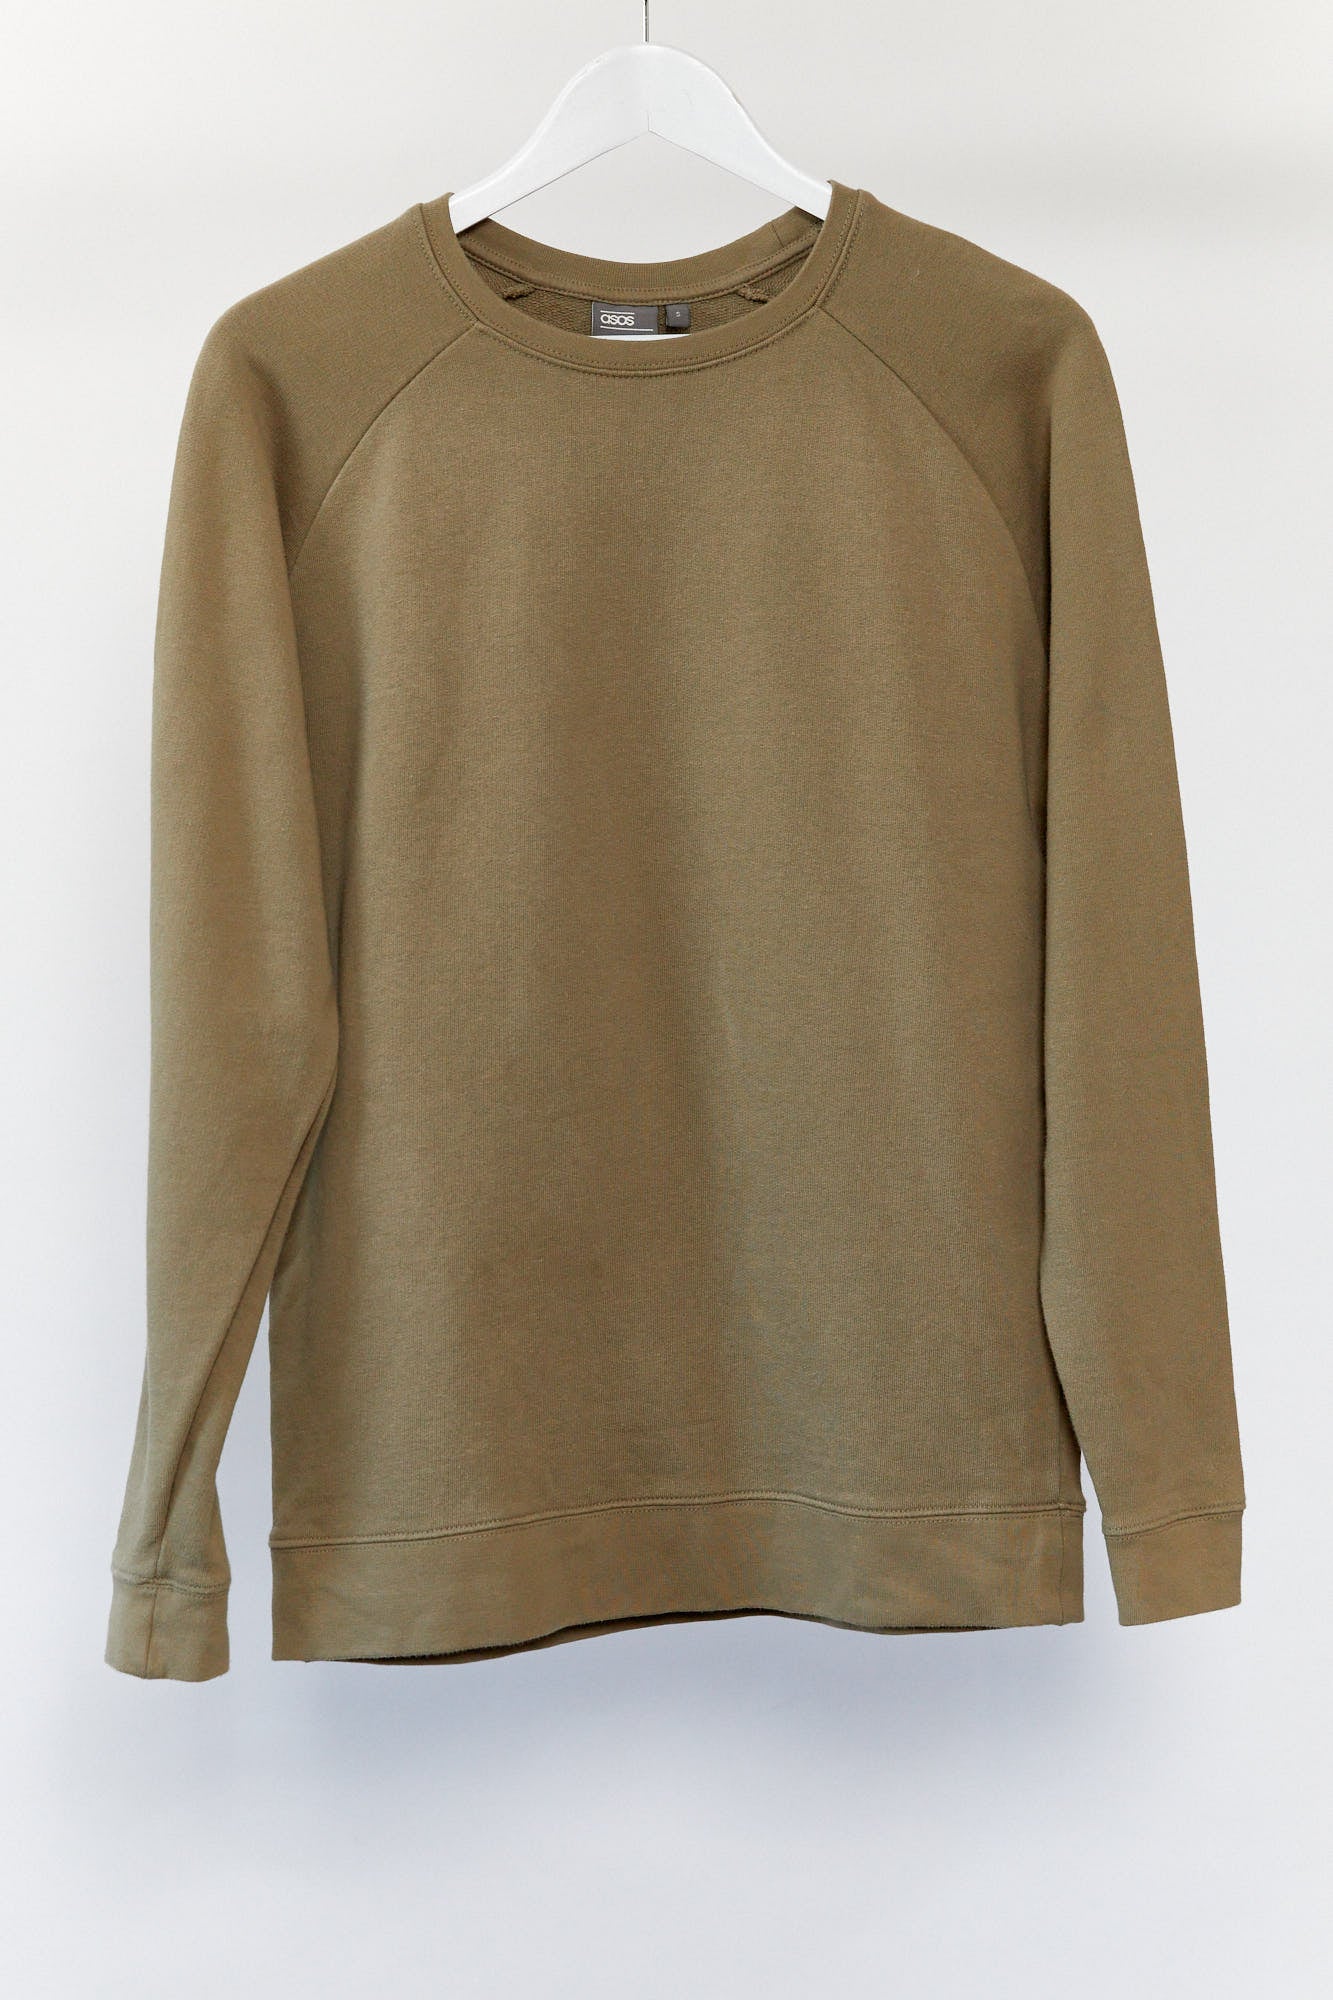 Womens brown ASOS sweater size small